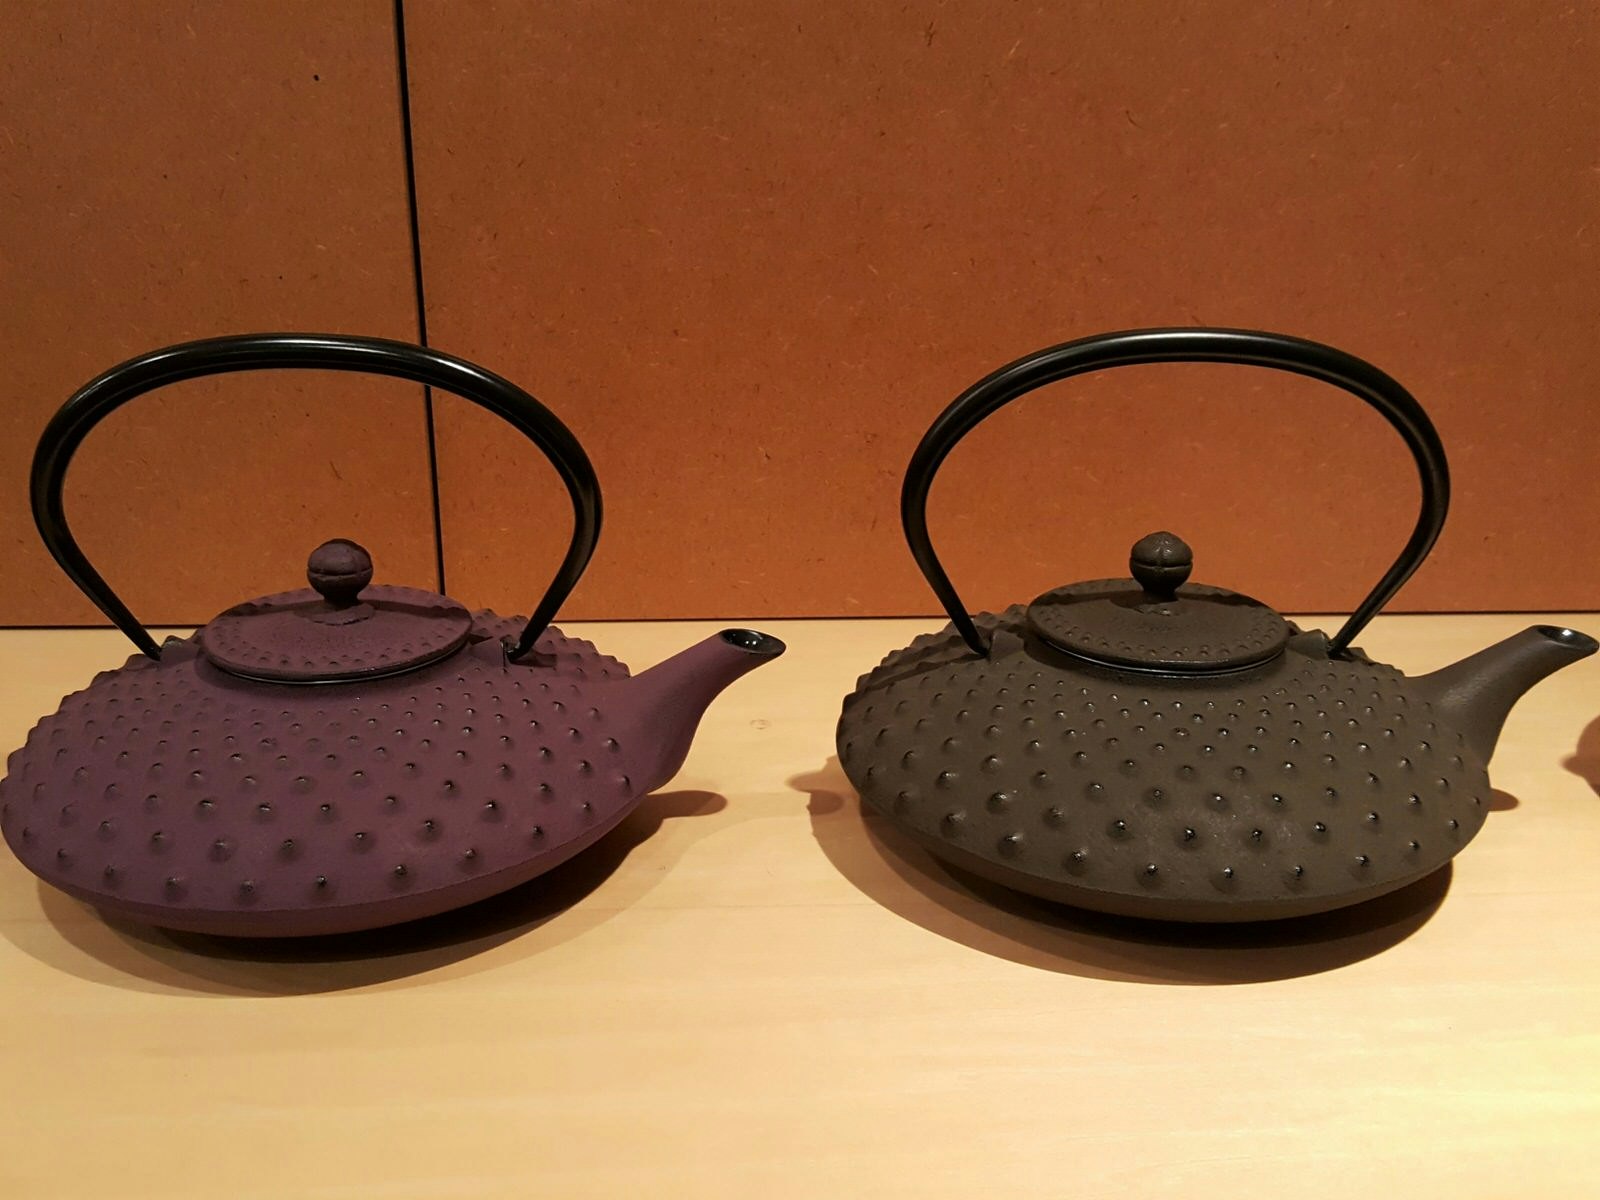 Two cast-iron tea kettles, one purple and one black, on a display shelf at Iwachu